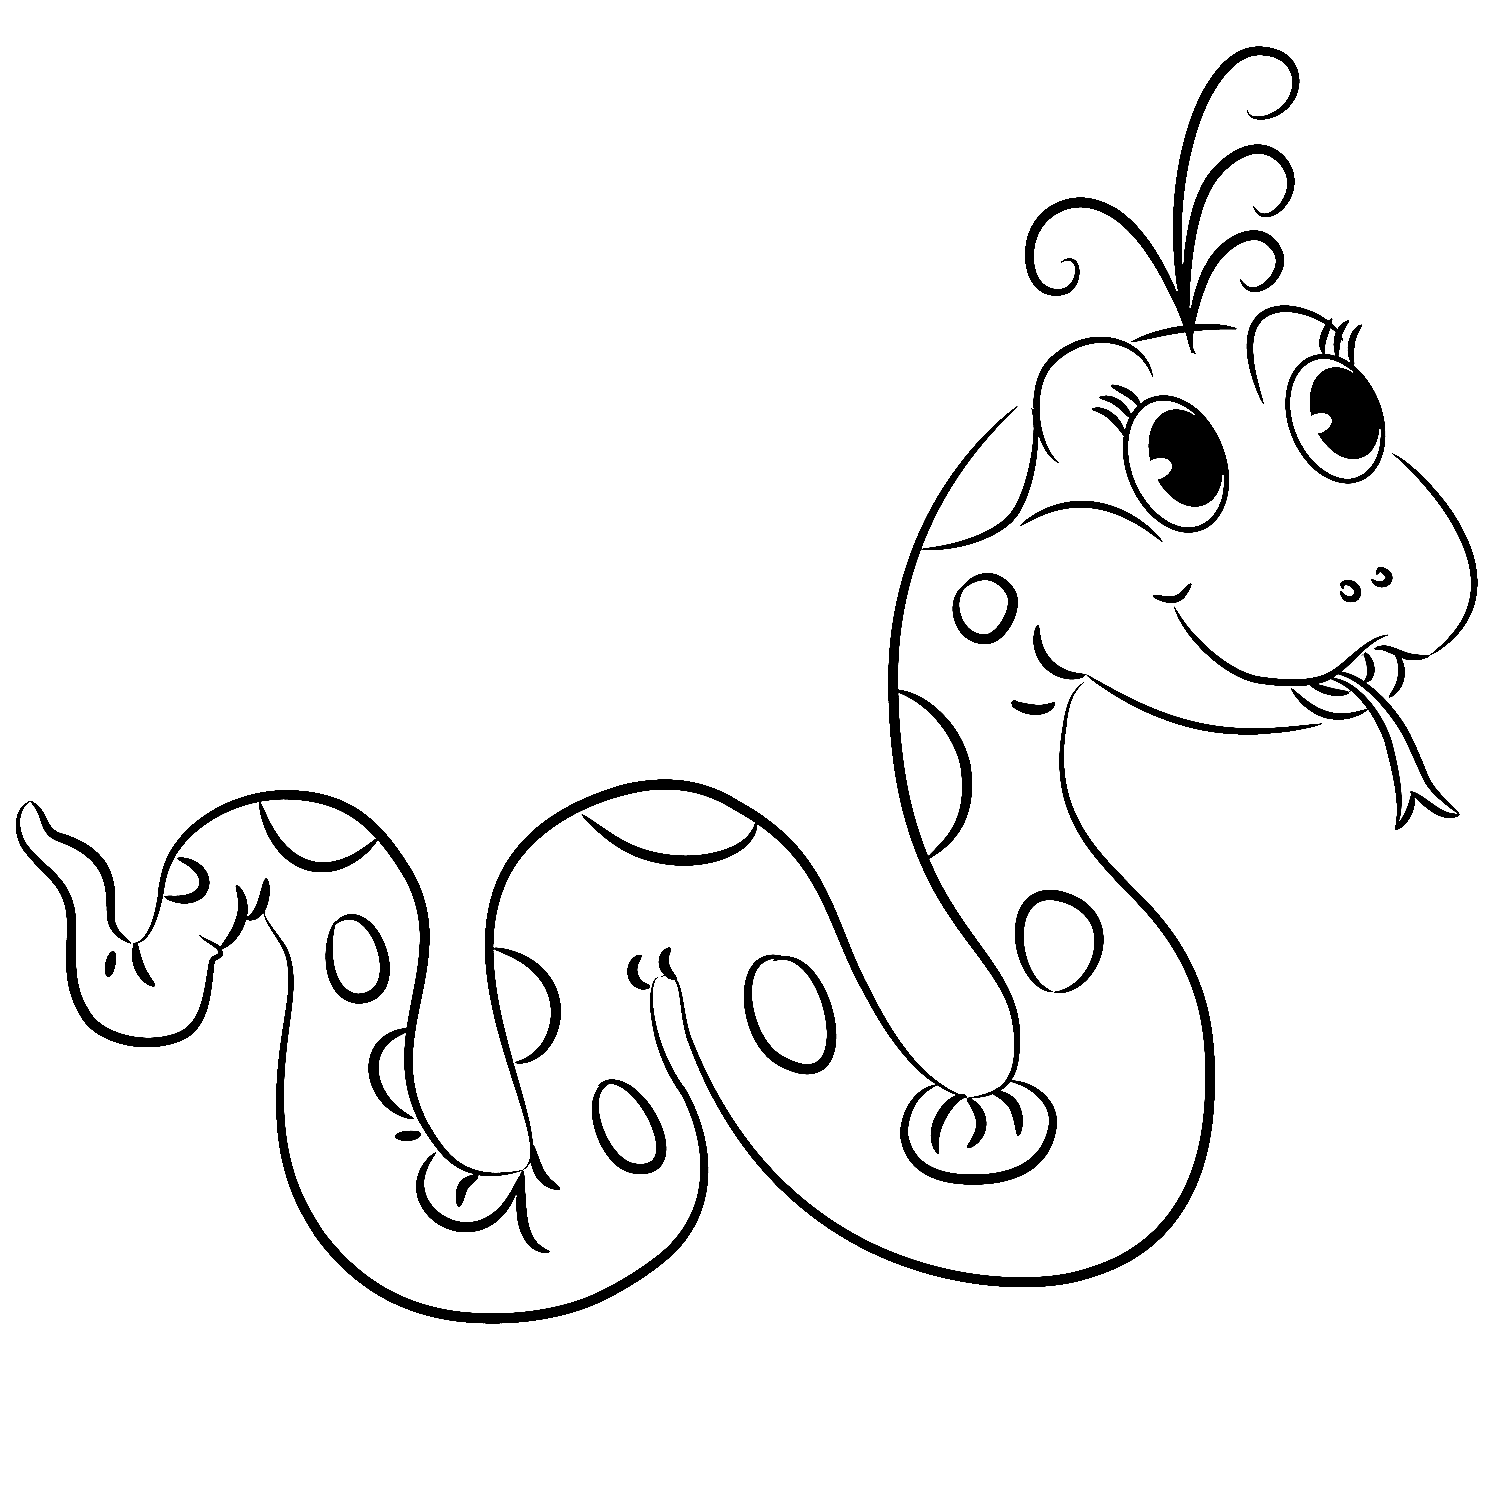 Snakes Coloring Pages Printable Coloring Home